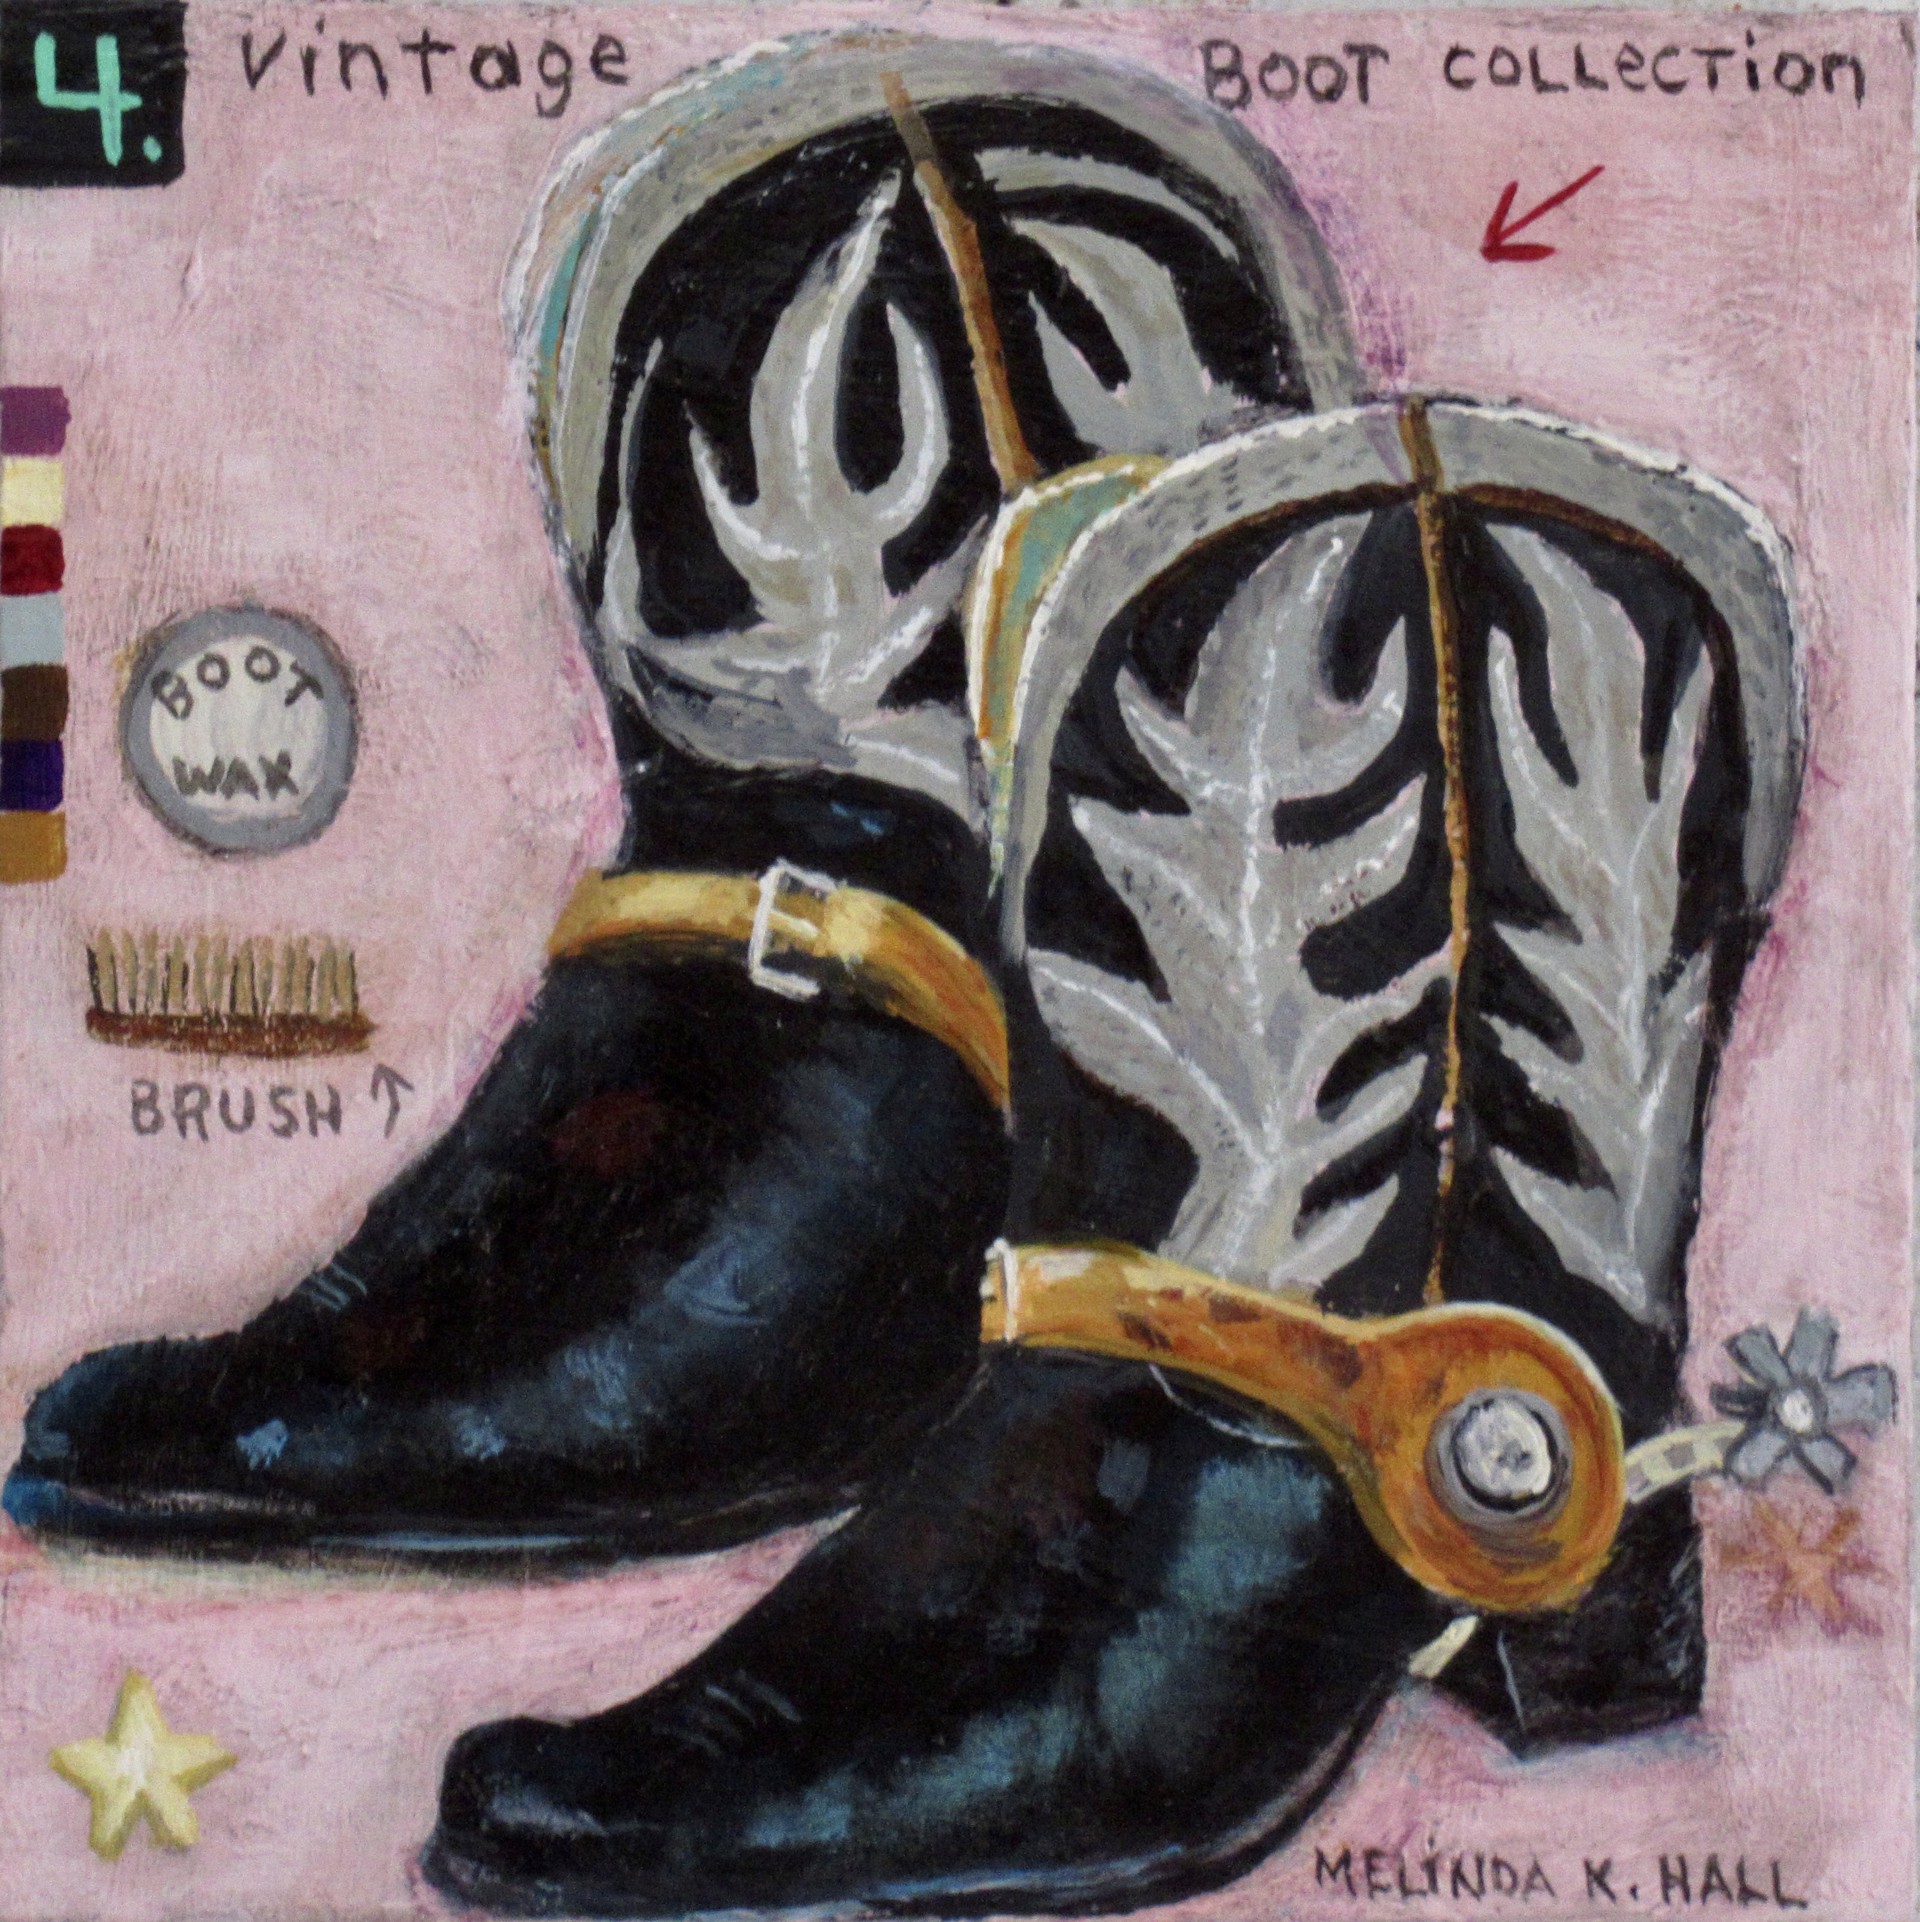 Vintage Boot Collection #4 by Melinda K. Hall